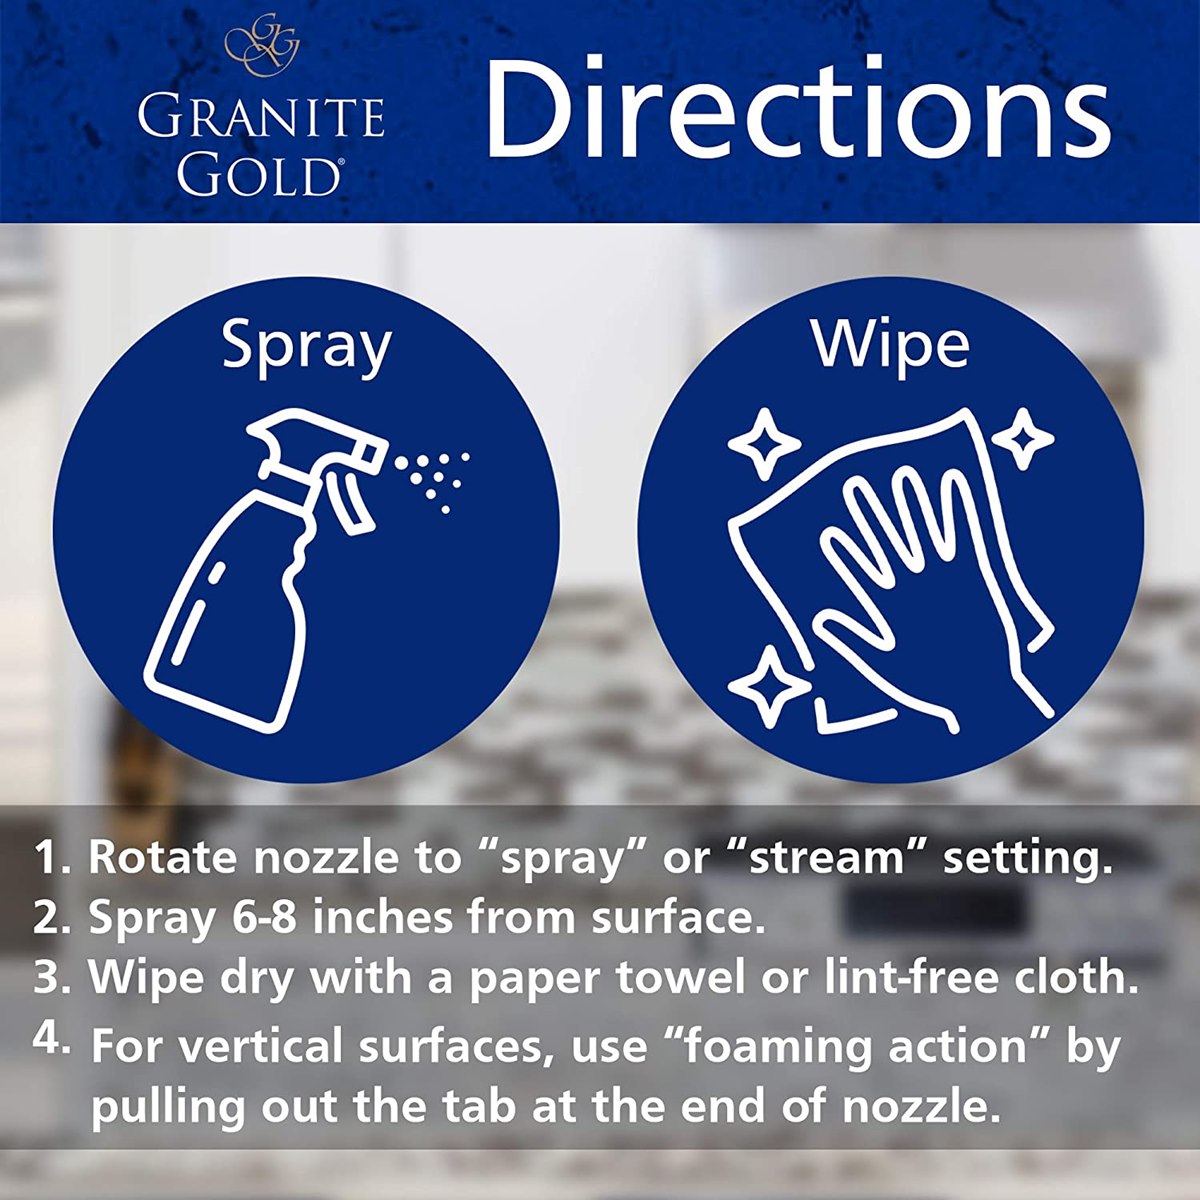 How to Clean and Maintain Granite Worktops